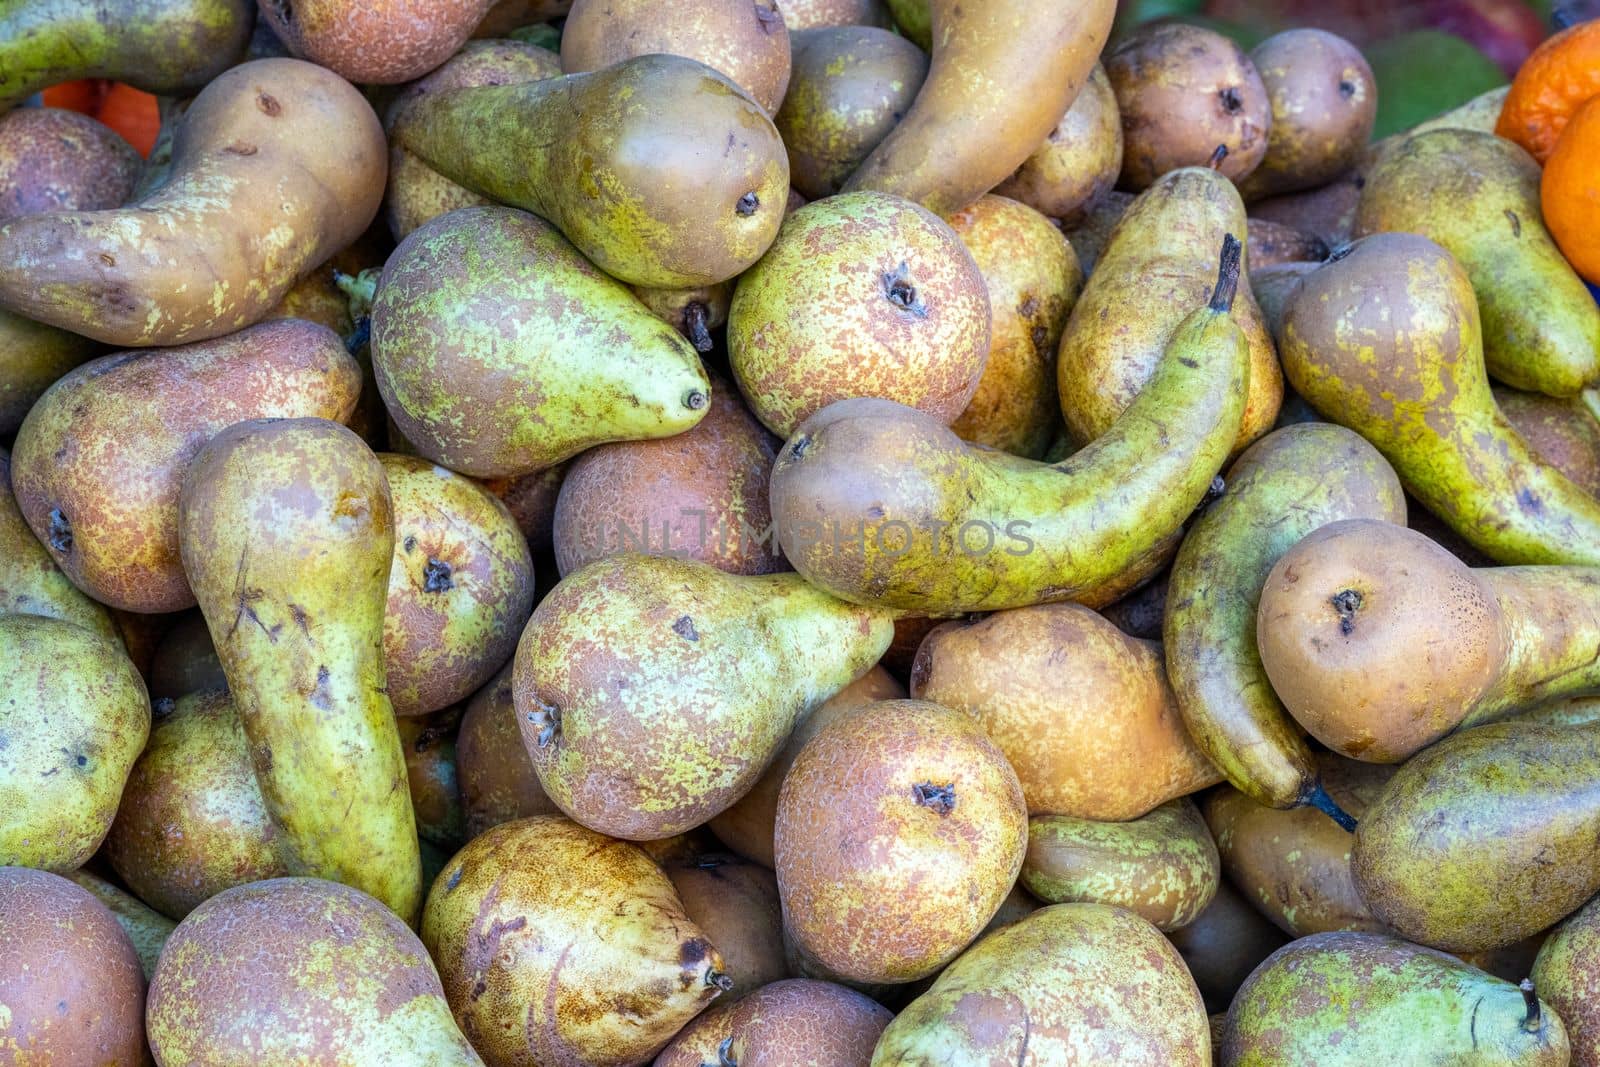 Green pears for sale at a a market